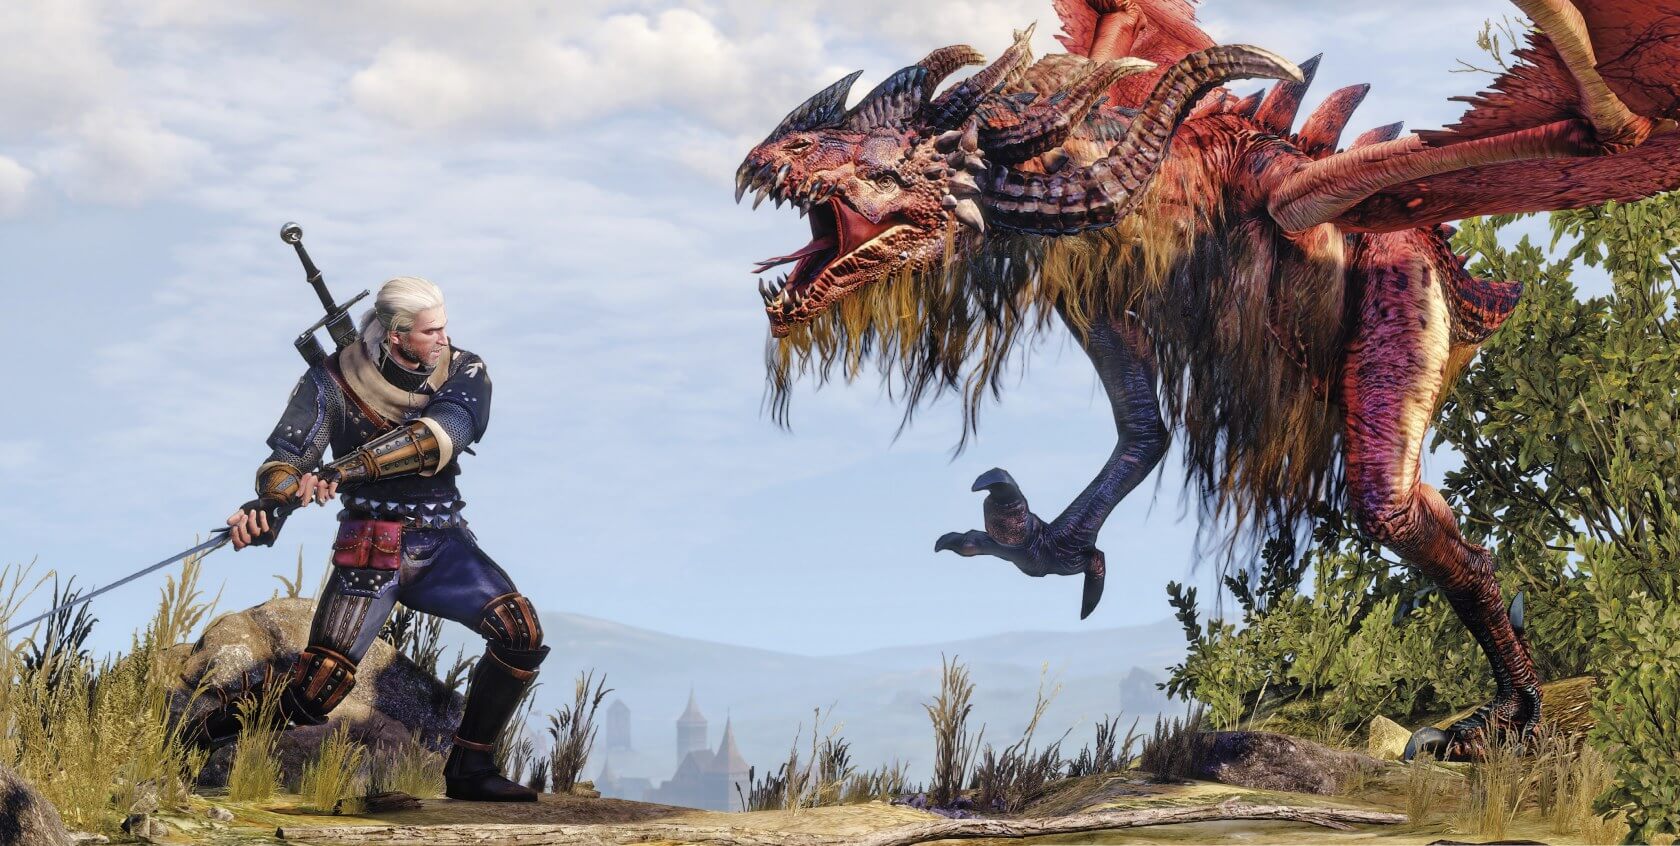 The Witcher franchise has sold over 50 million copies